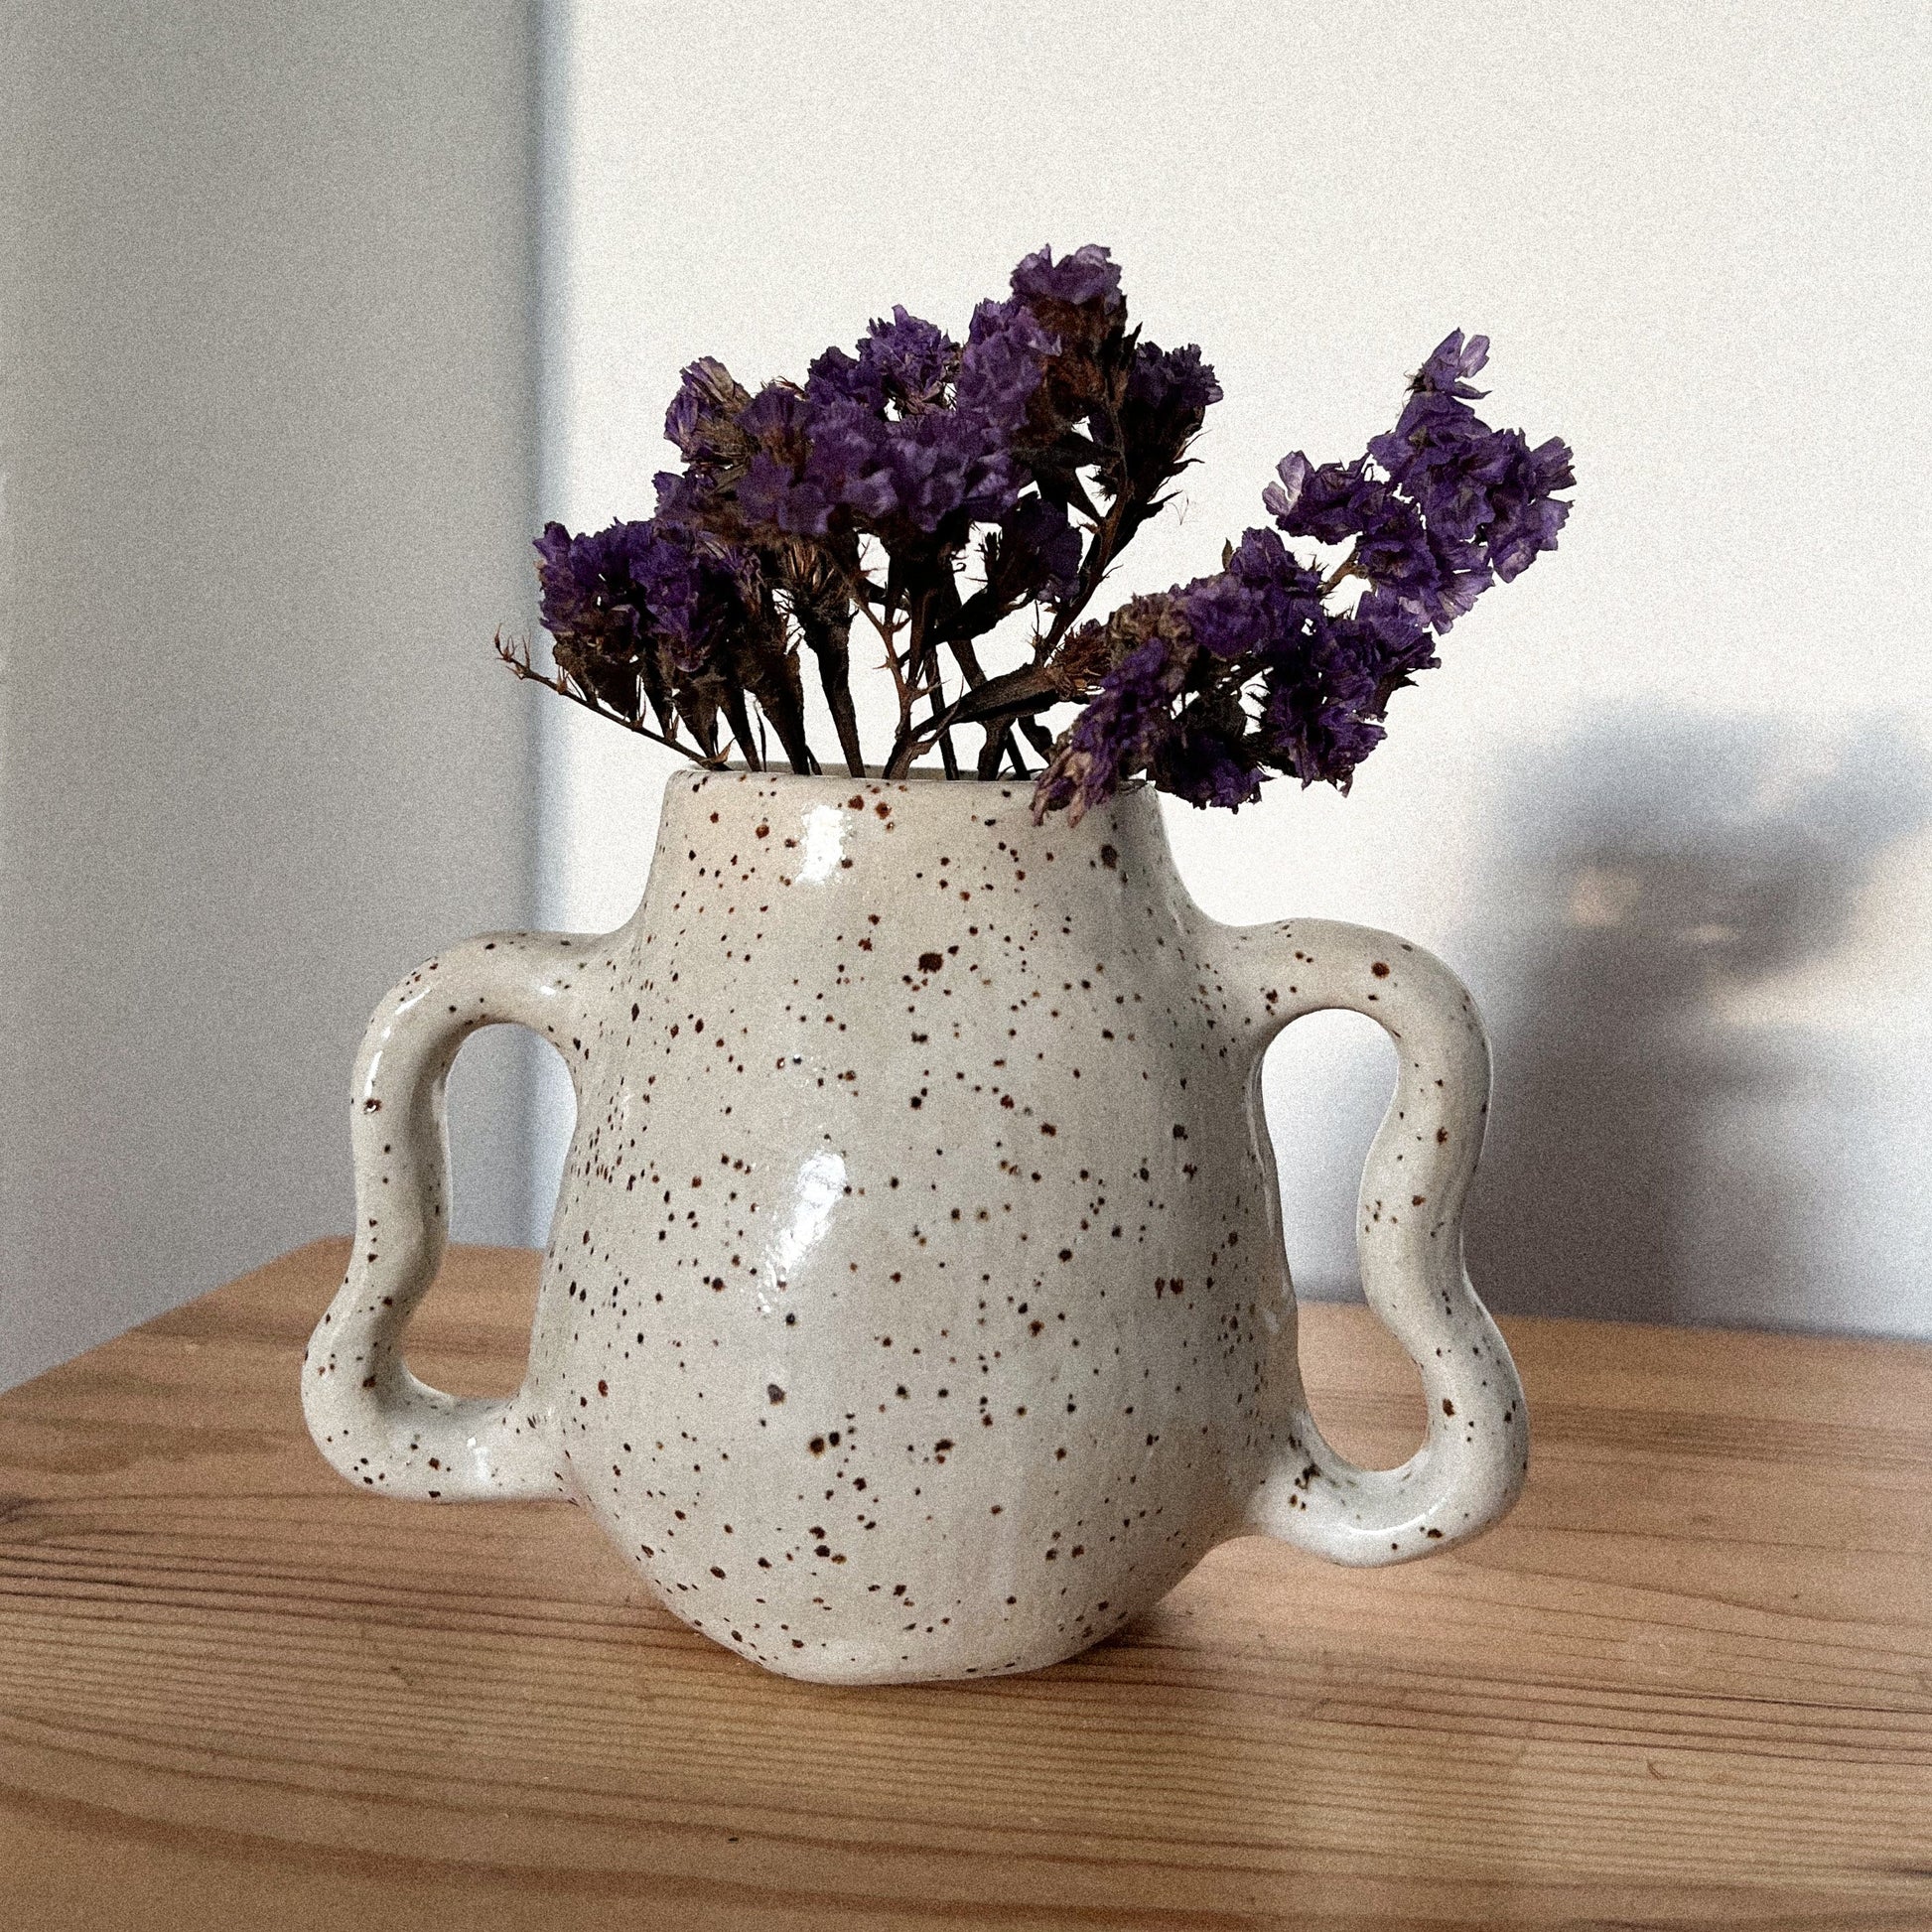 Handmade ceramic vase with wavy handles and speckled effect